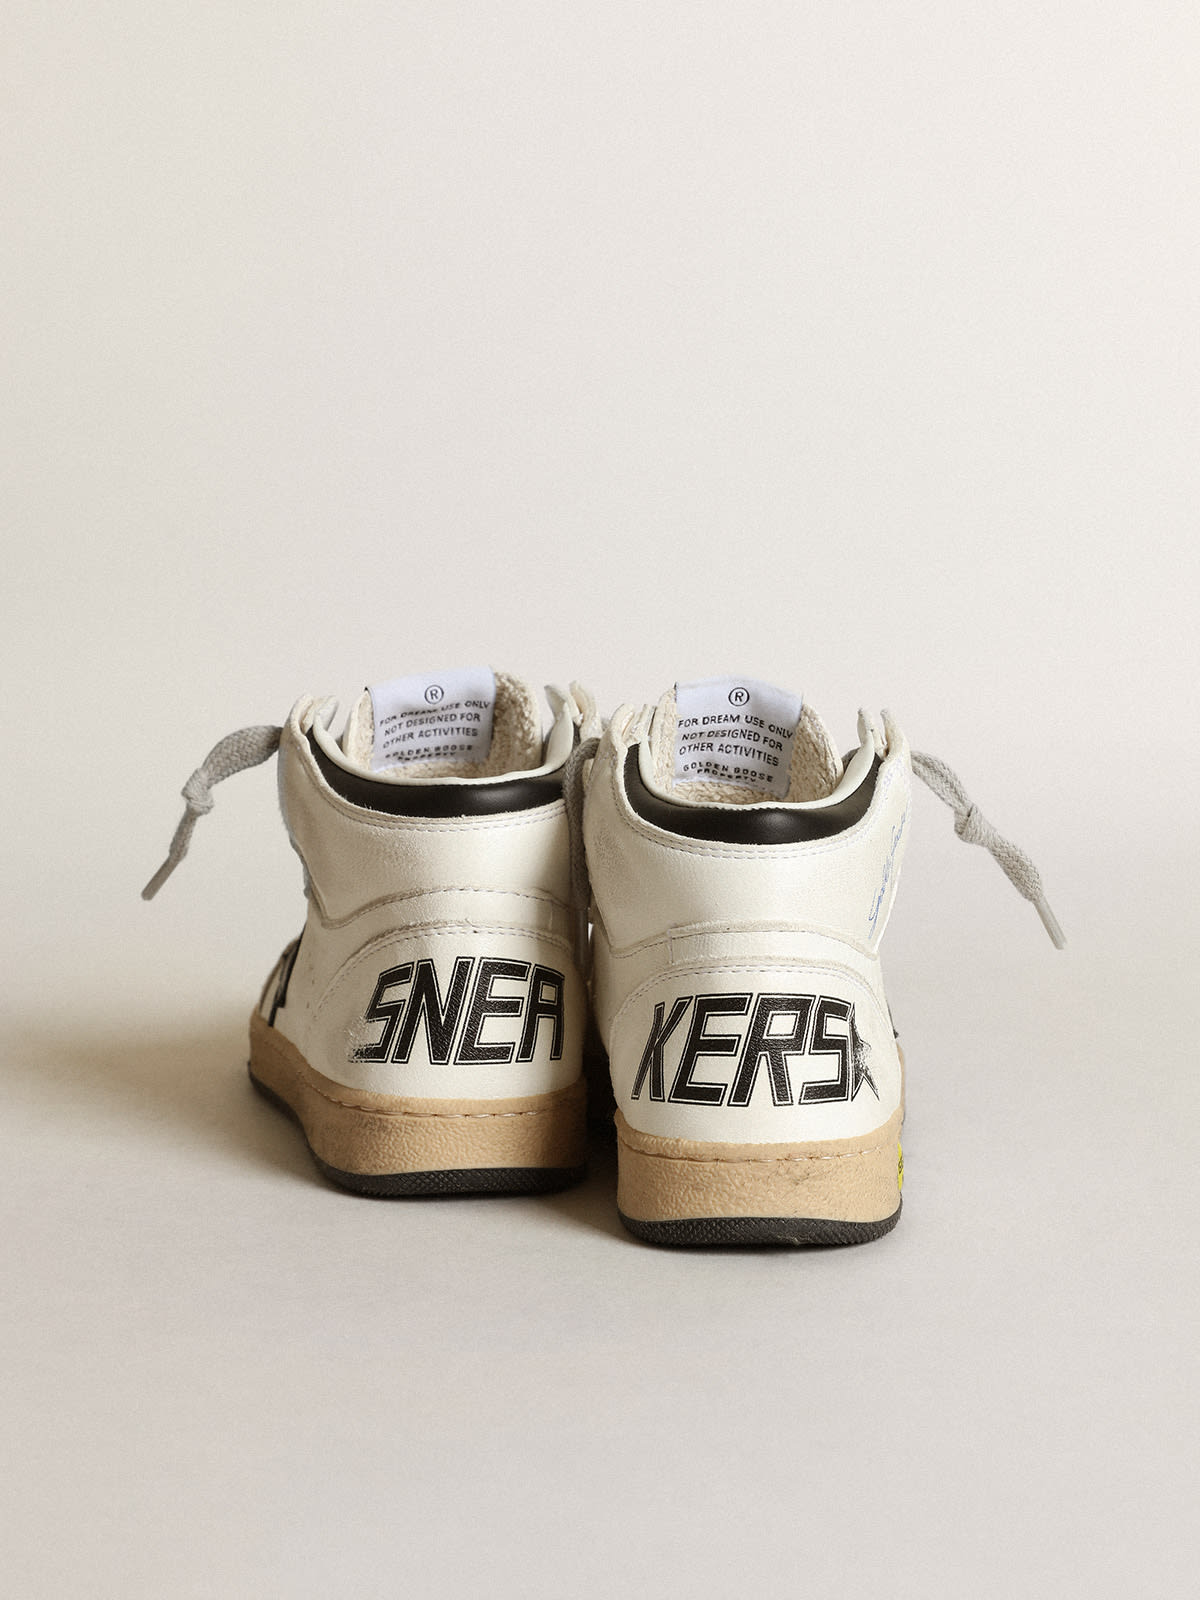 Golden Goose - Young Sky-Star sneakers in white nappa leather with black leather star and heel tab in 